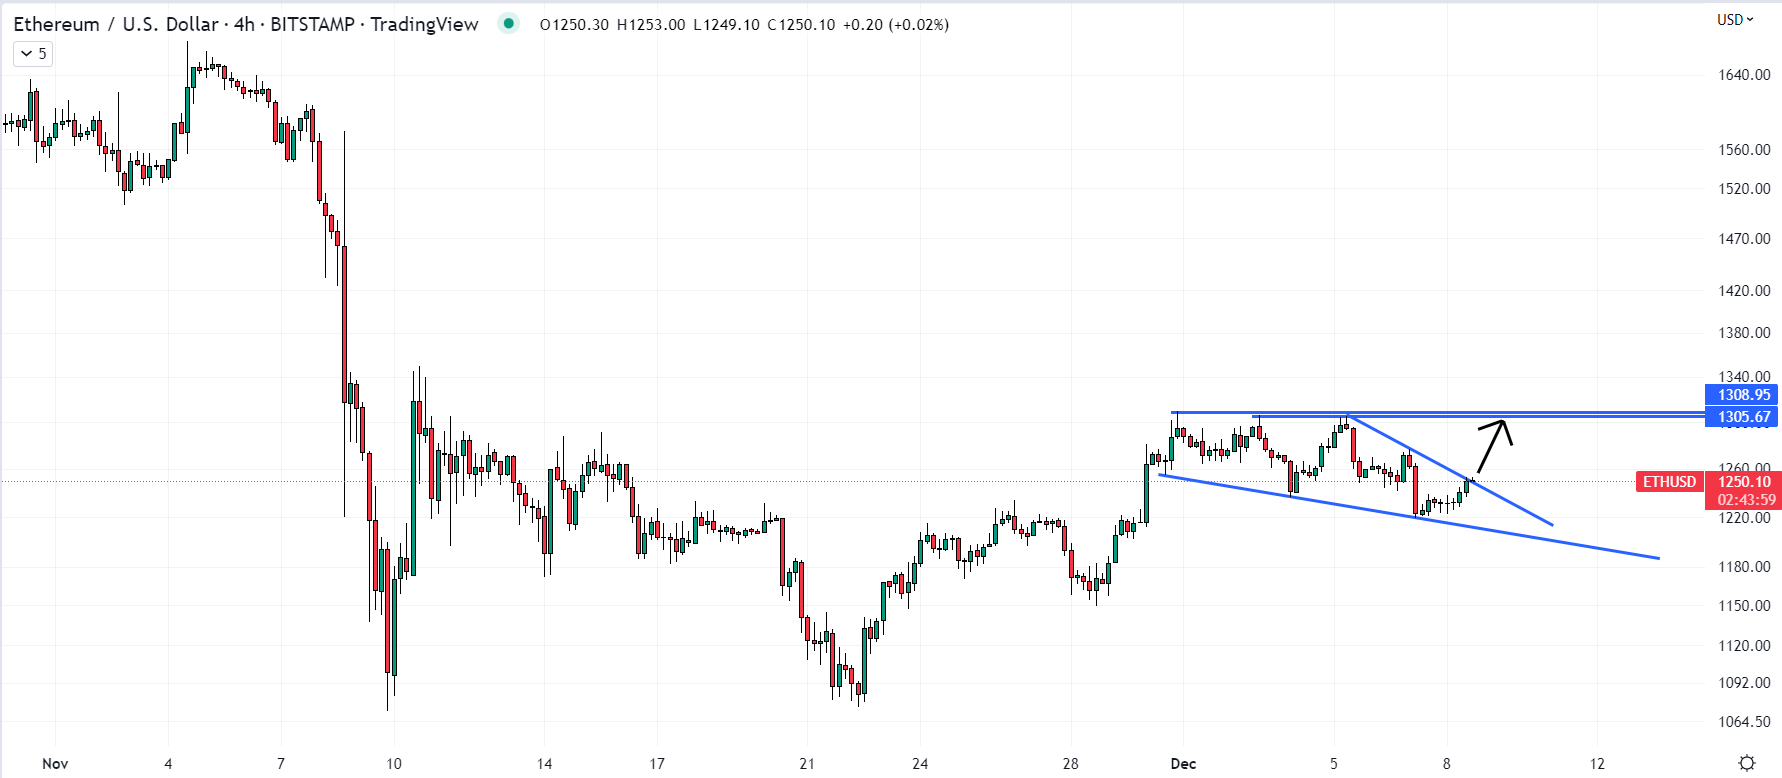 Ethereum Price Prediction with ETH Down 4.5% from Highs – Here’s Where It’s Headed Next